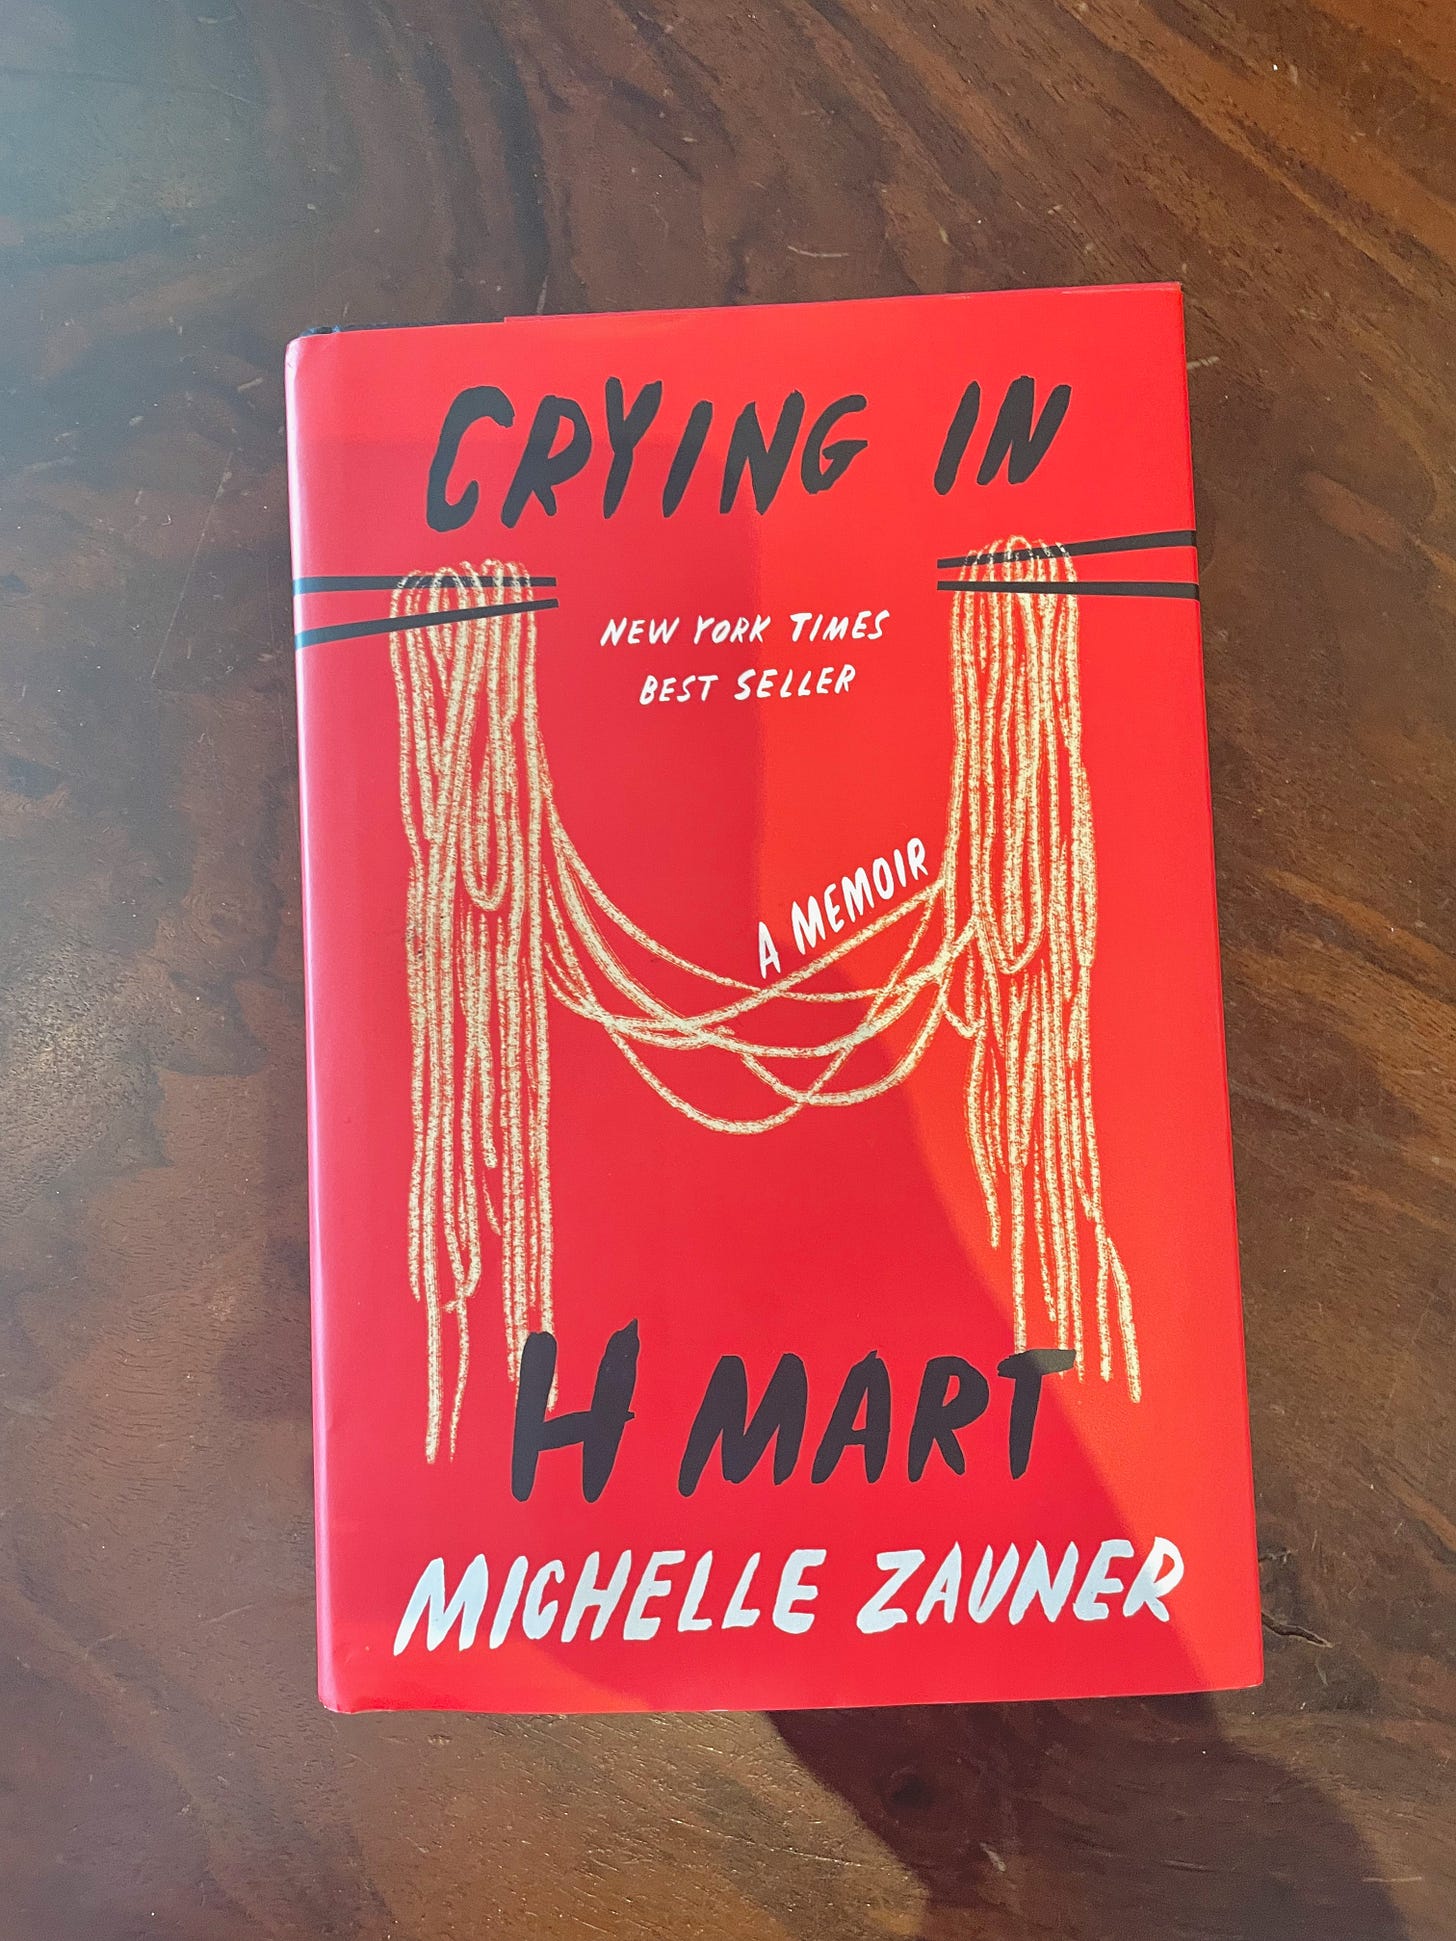 image of the novel "crying in h mart" on a surface table